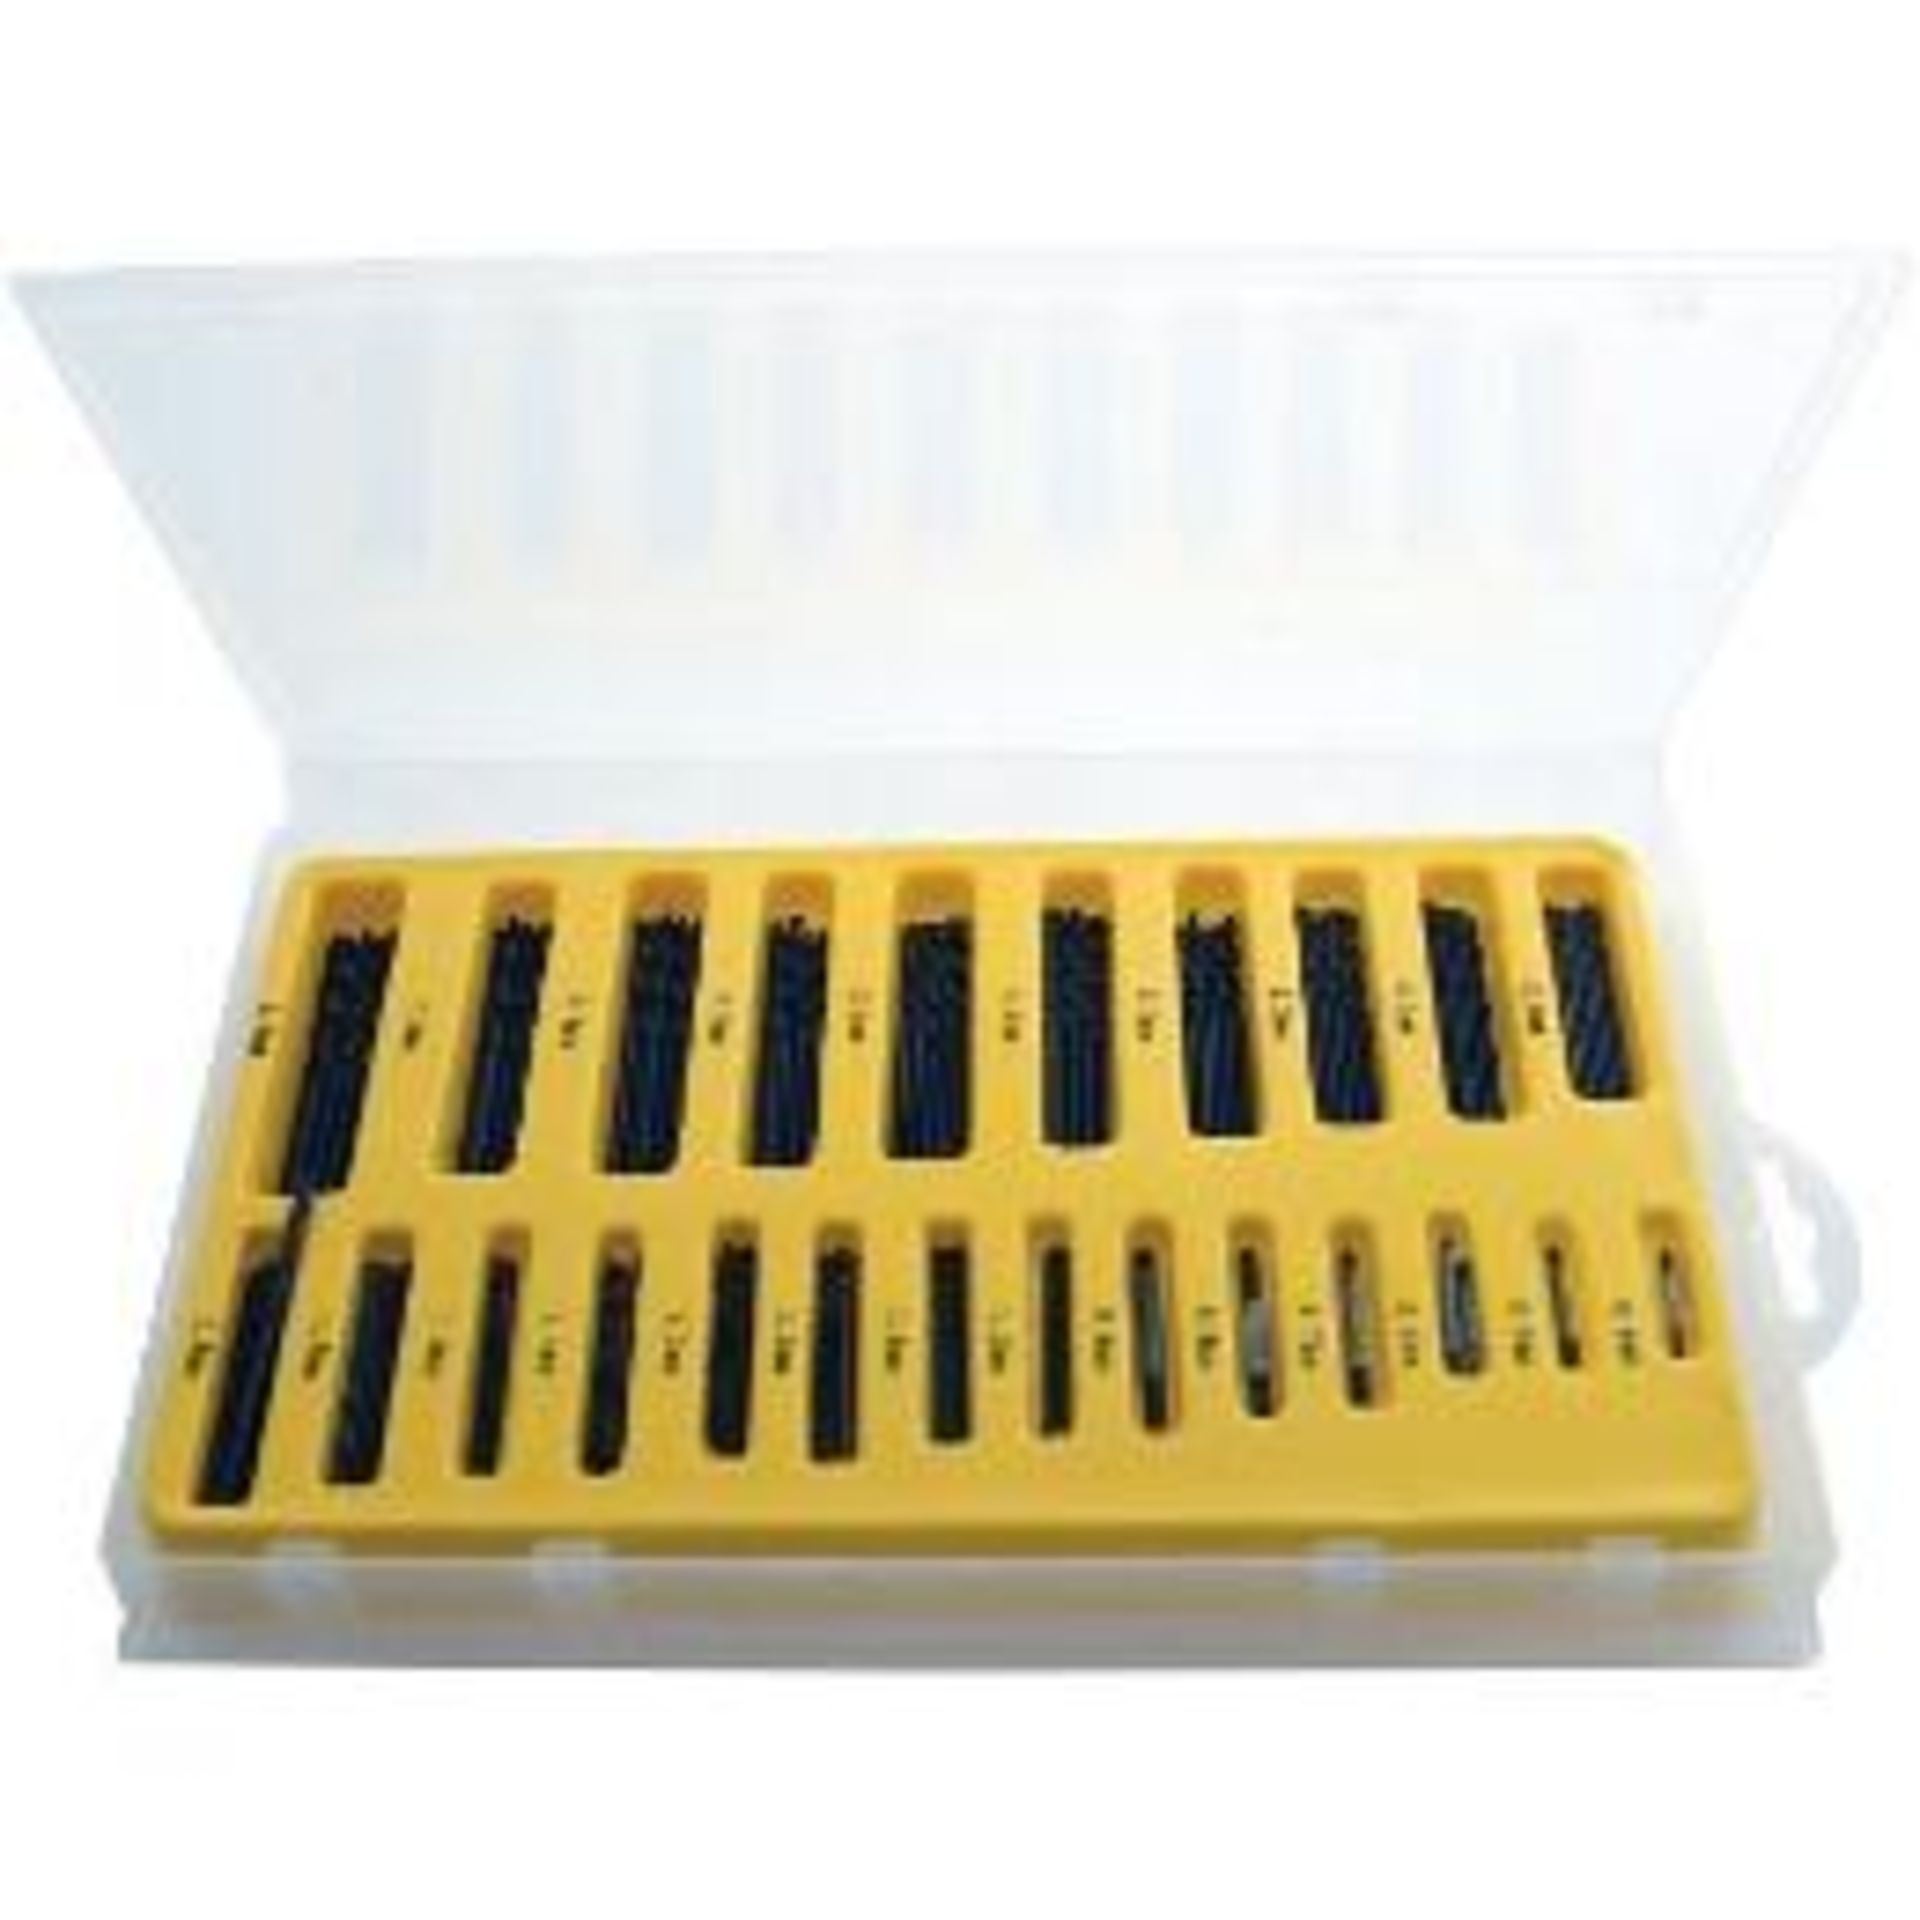 V *TRADE QTY* Brand New 150pce Drill Bit Set X 3 YOUR BID PRICE TO BE MULTIPLIED BY THREE